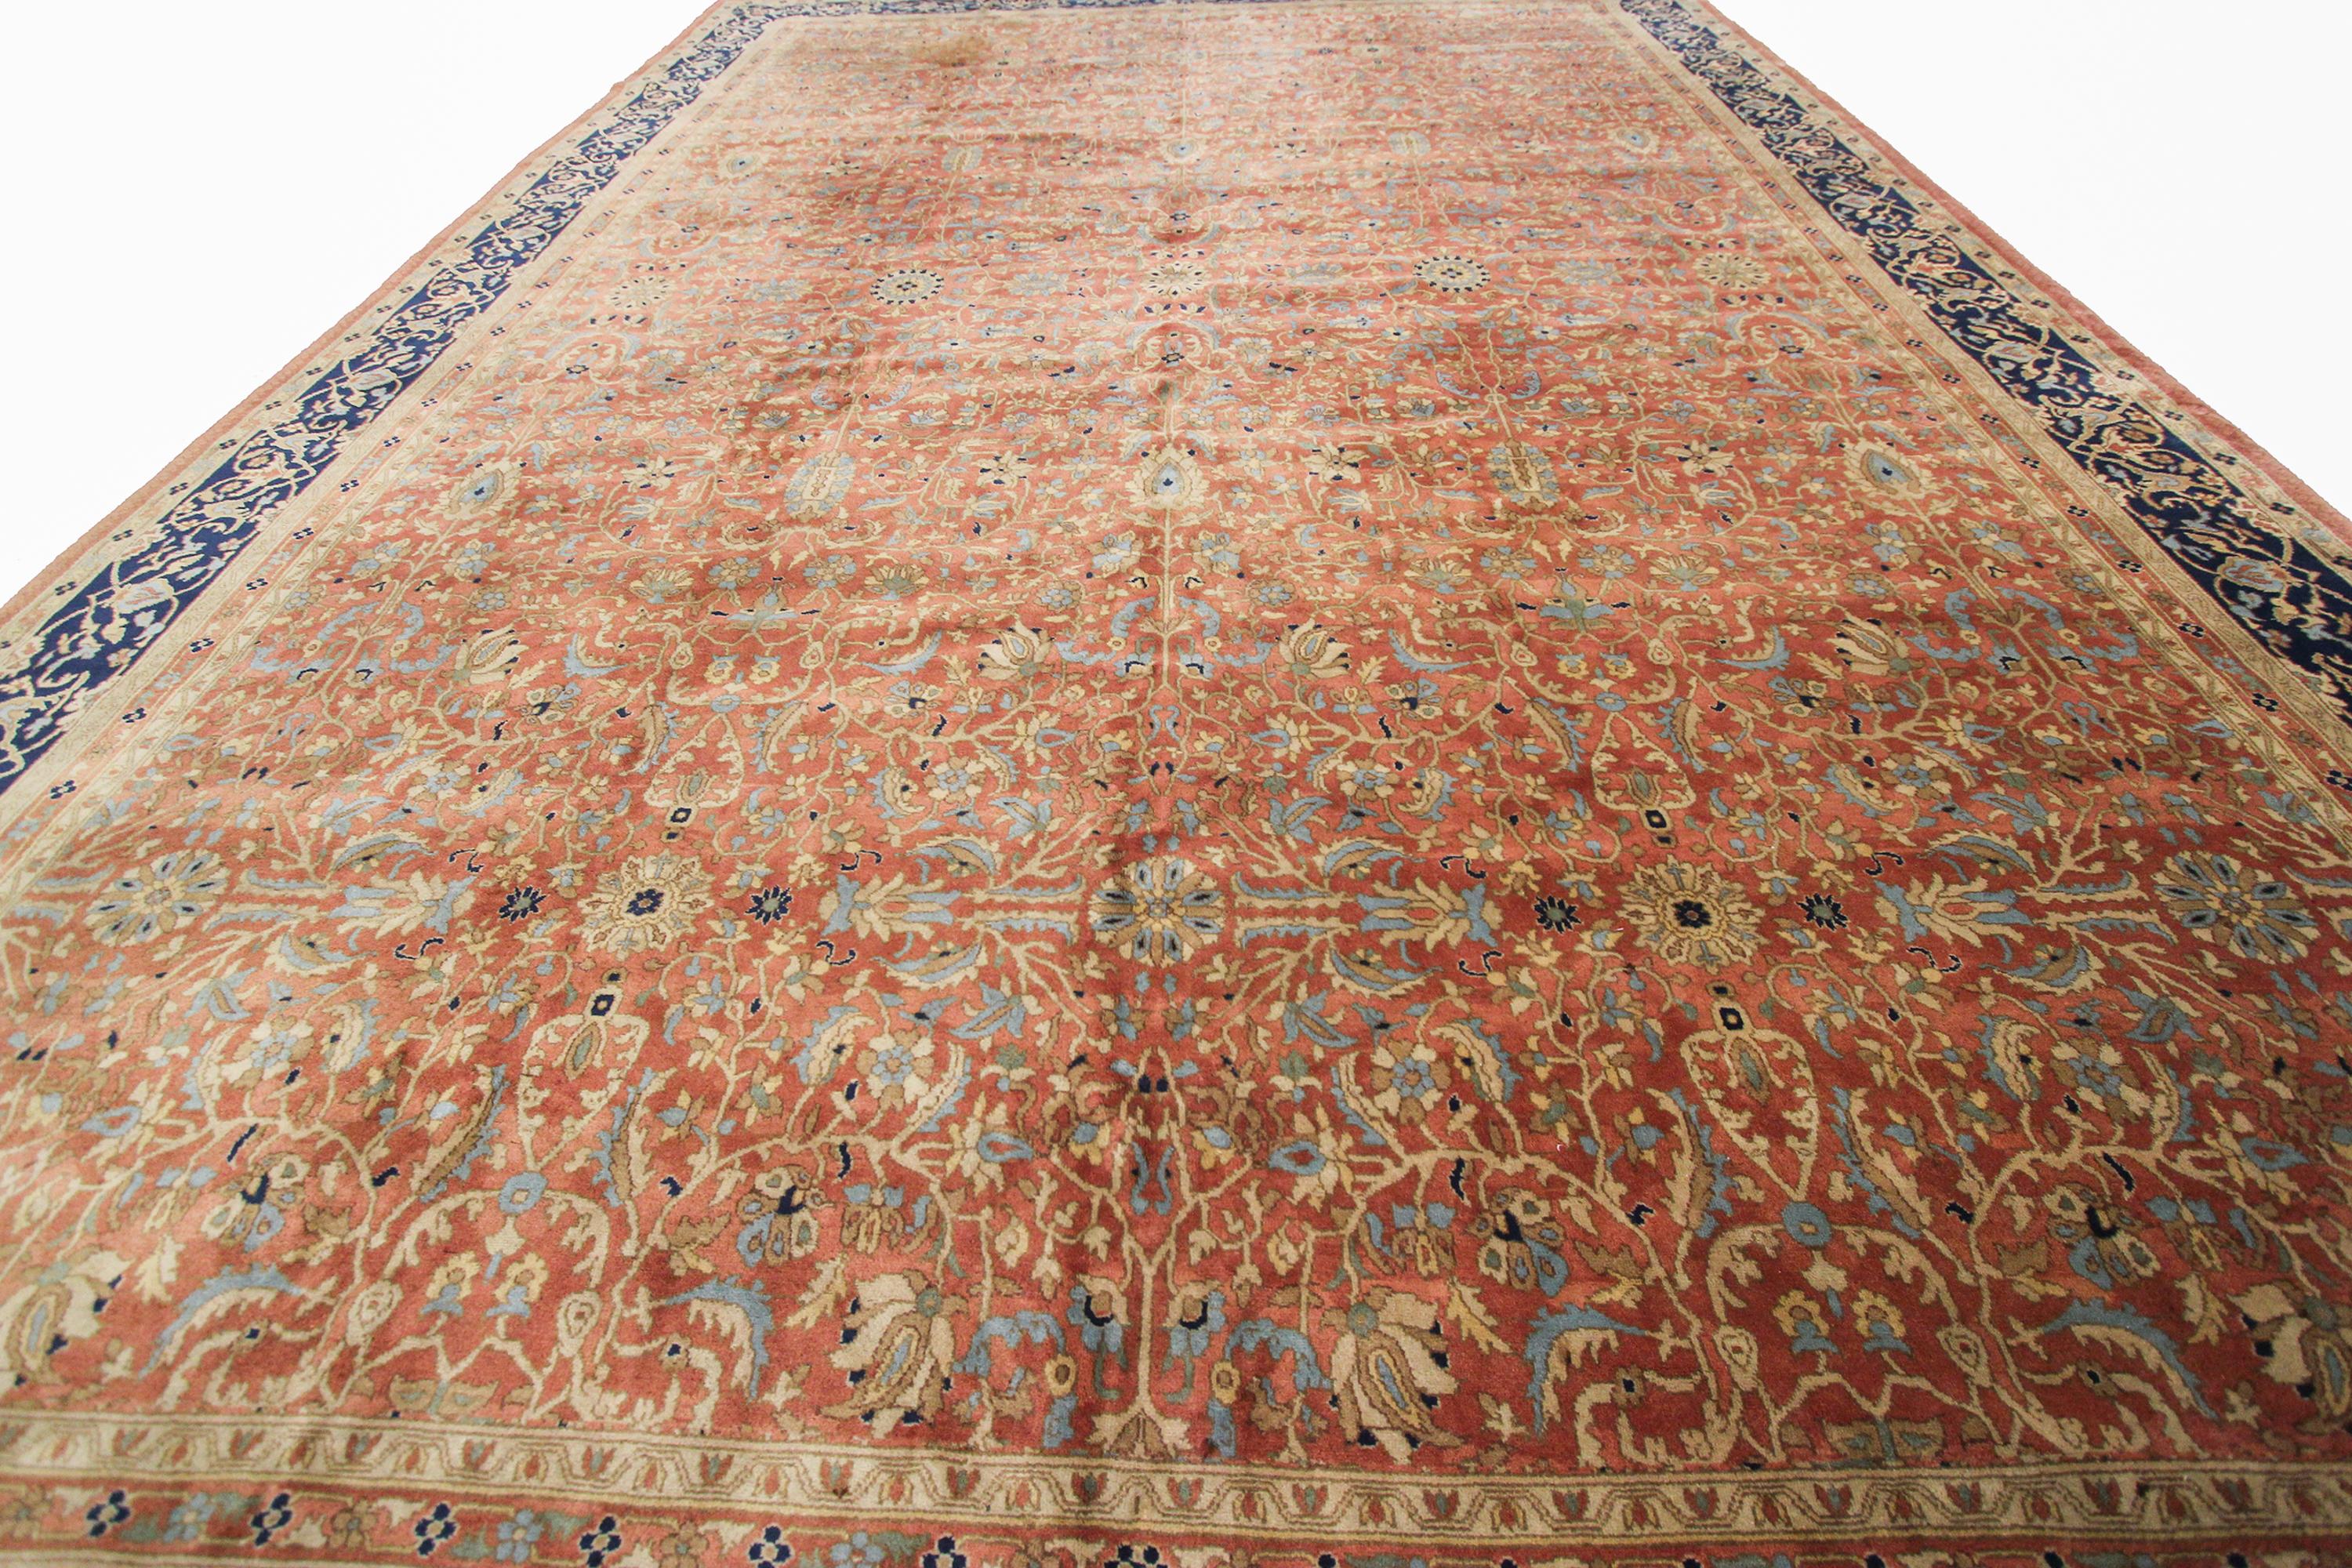 Early 20th Century Antique Turkish Oushak Sivas Fine Geometric Overall Rug 11x16 1900 328cm x 457cm For Sale